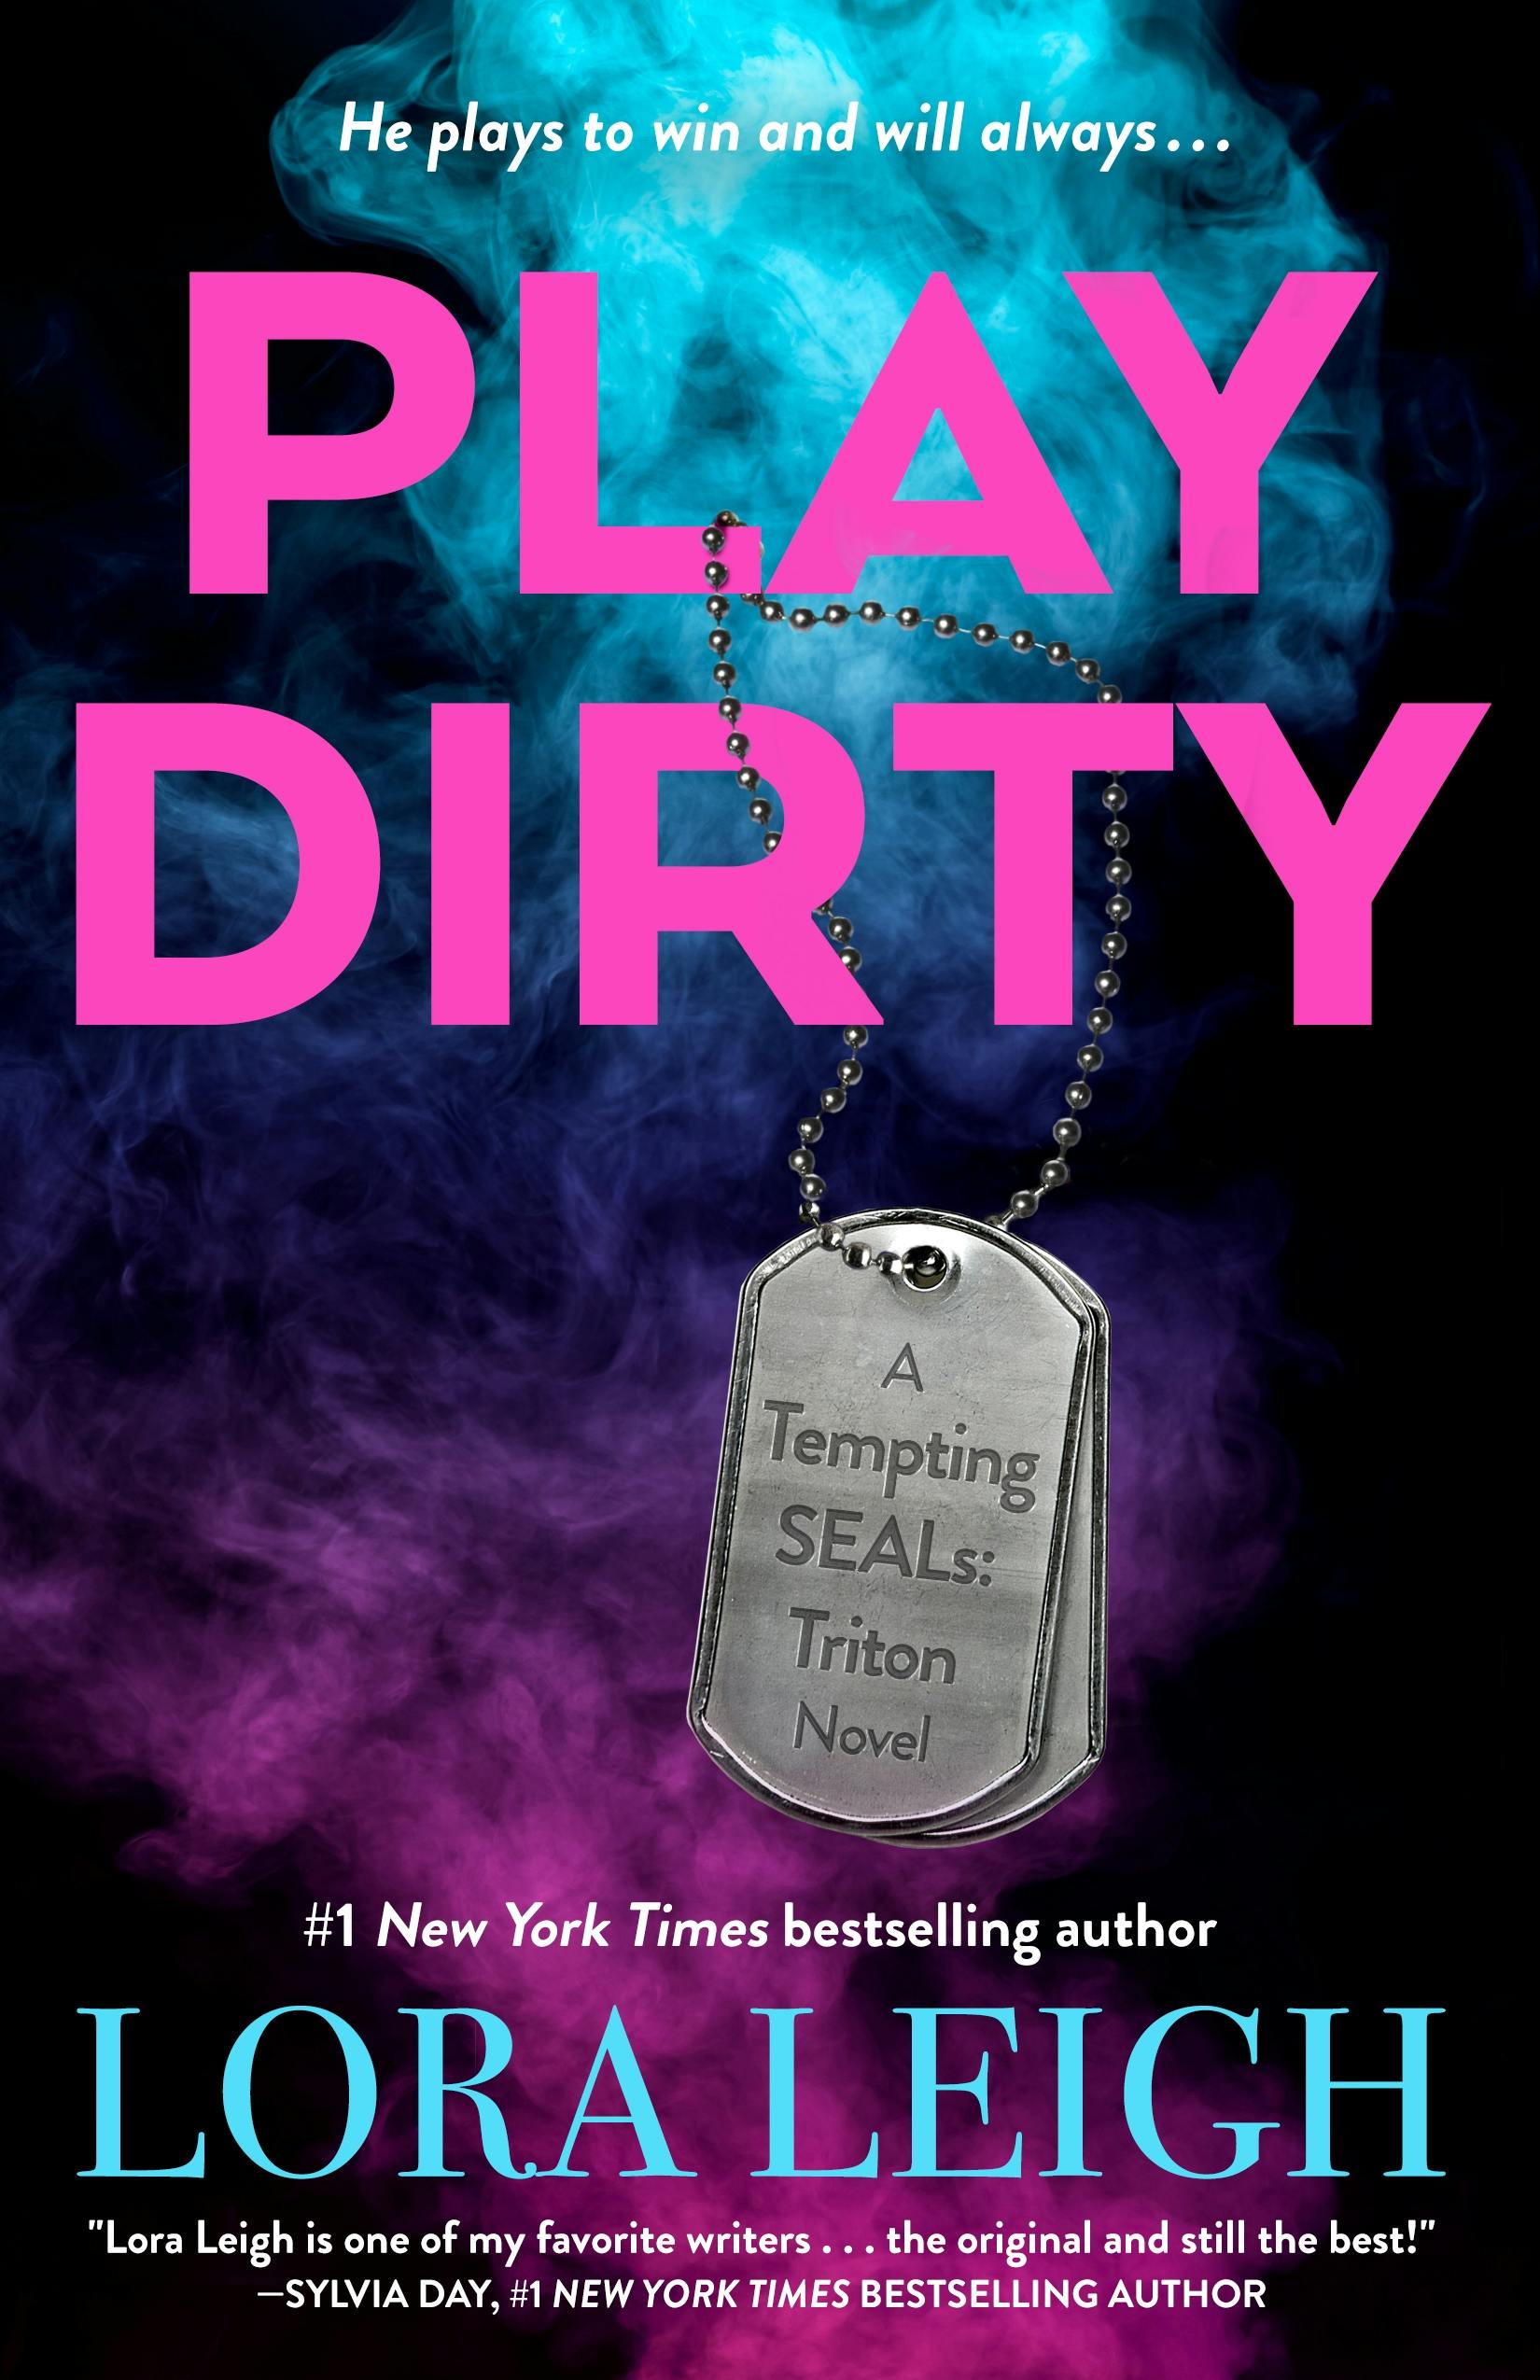 Cover for the book titled as: Play Dirty